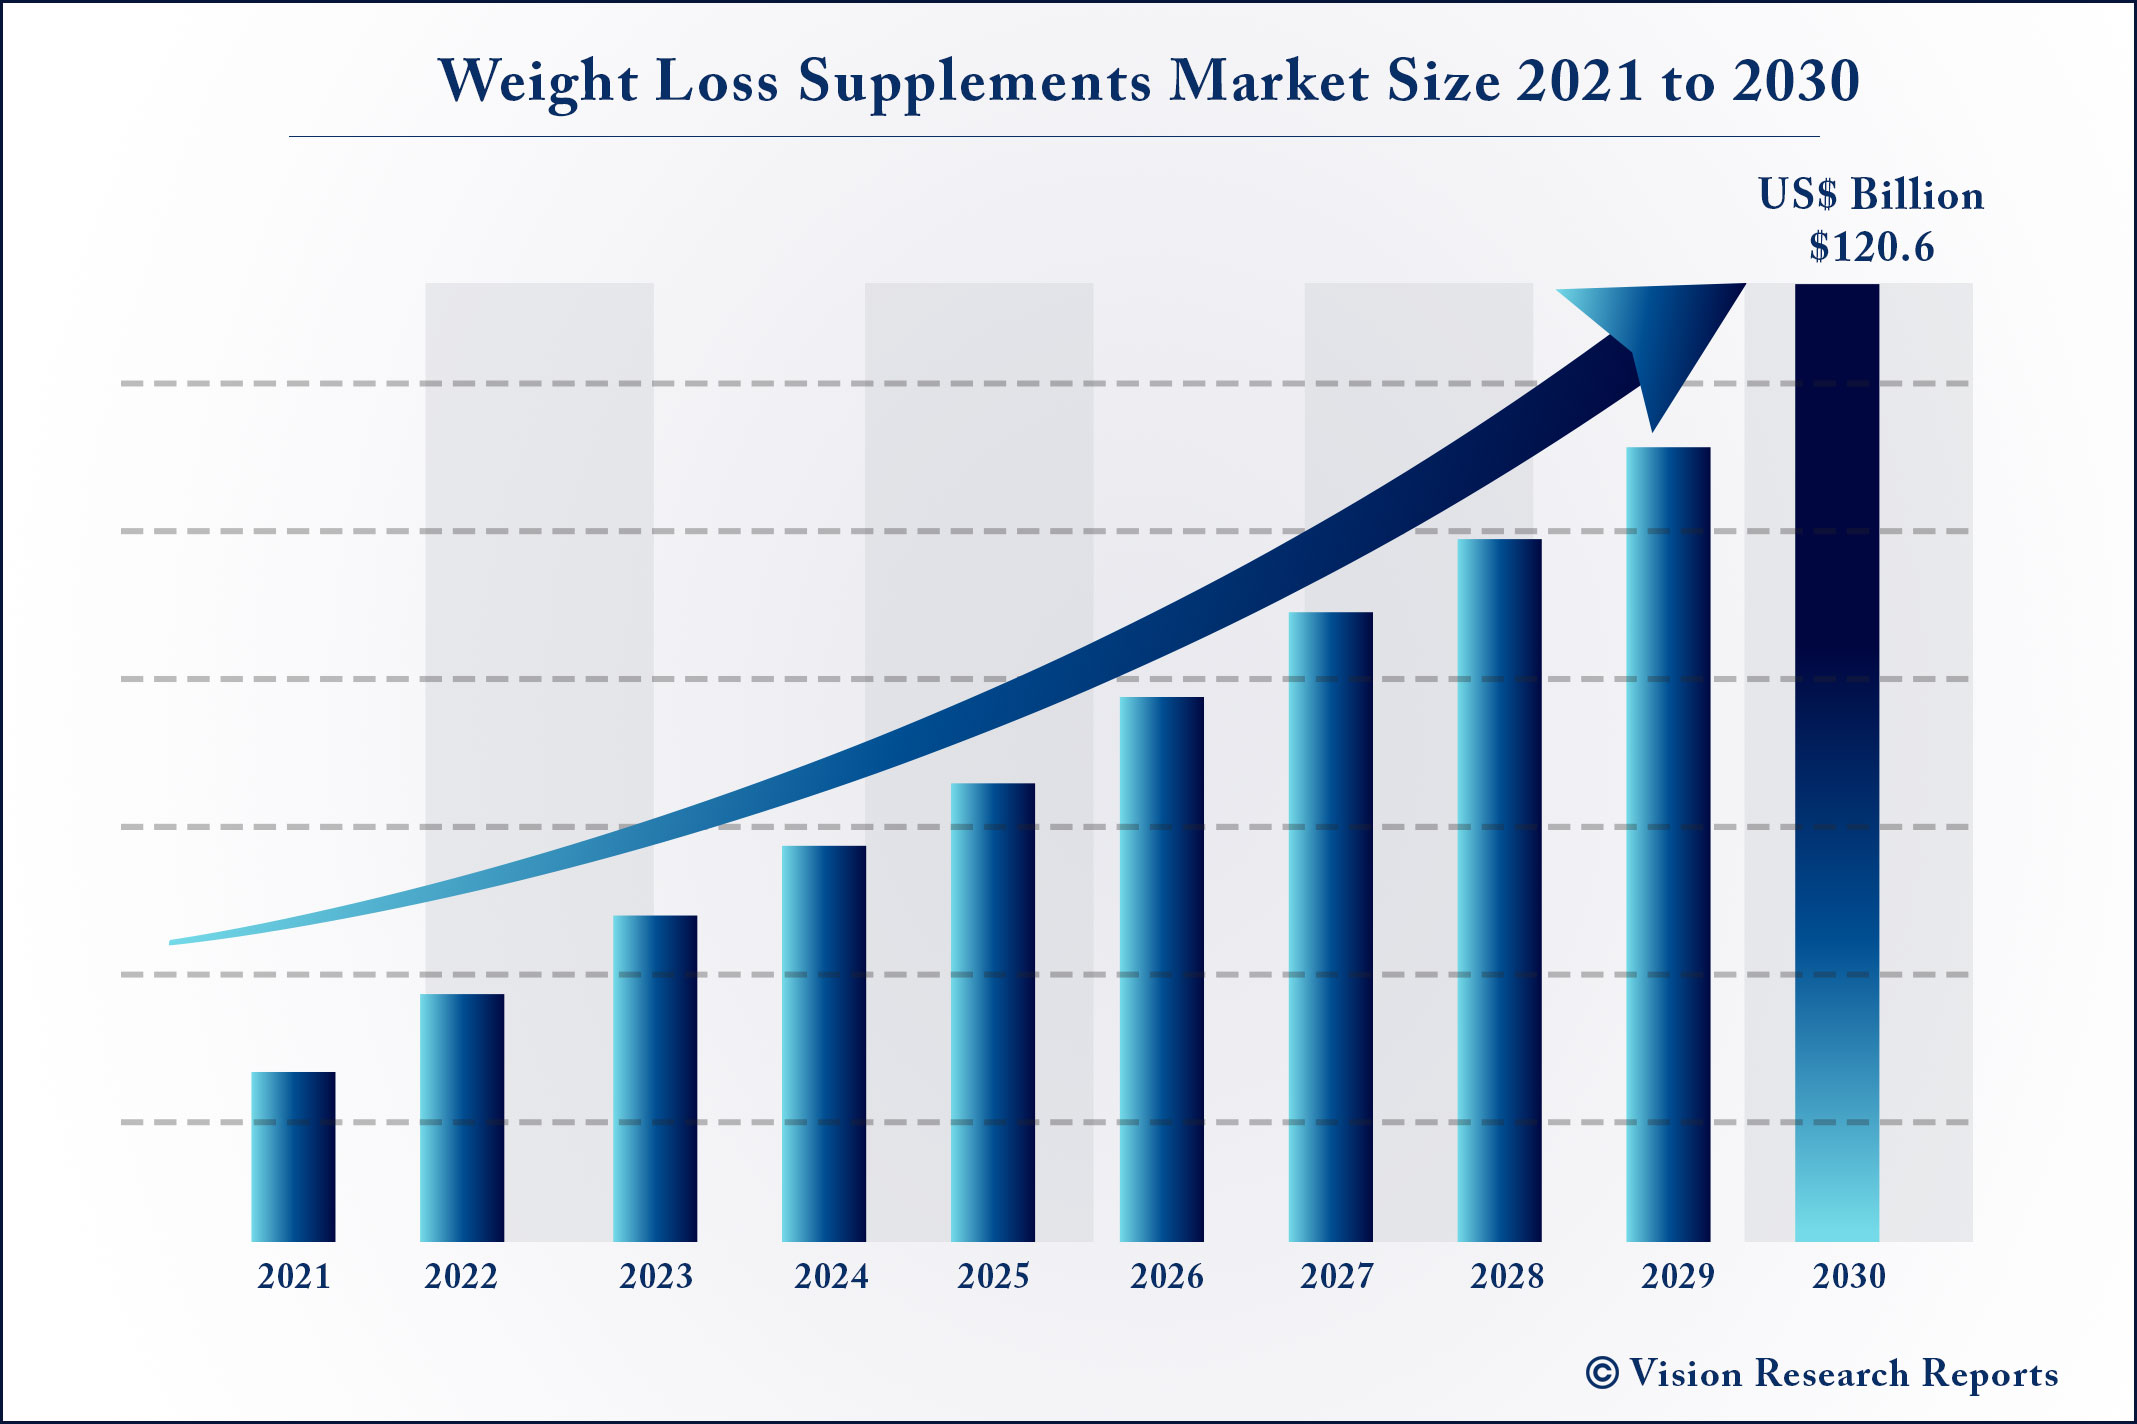 Weight Loss Supplements Market Size 2021 to 2030